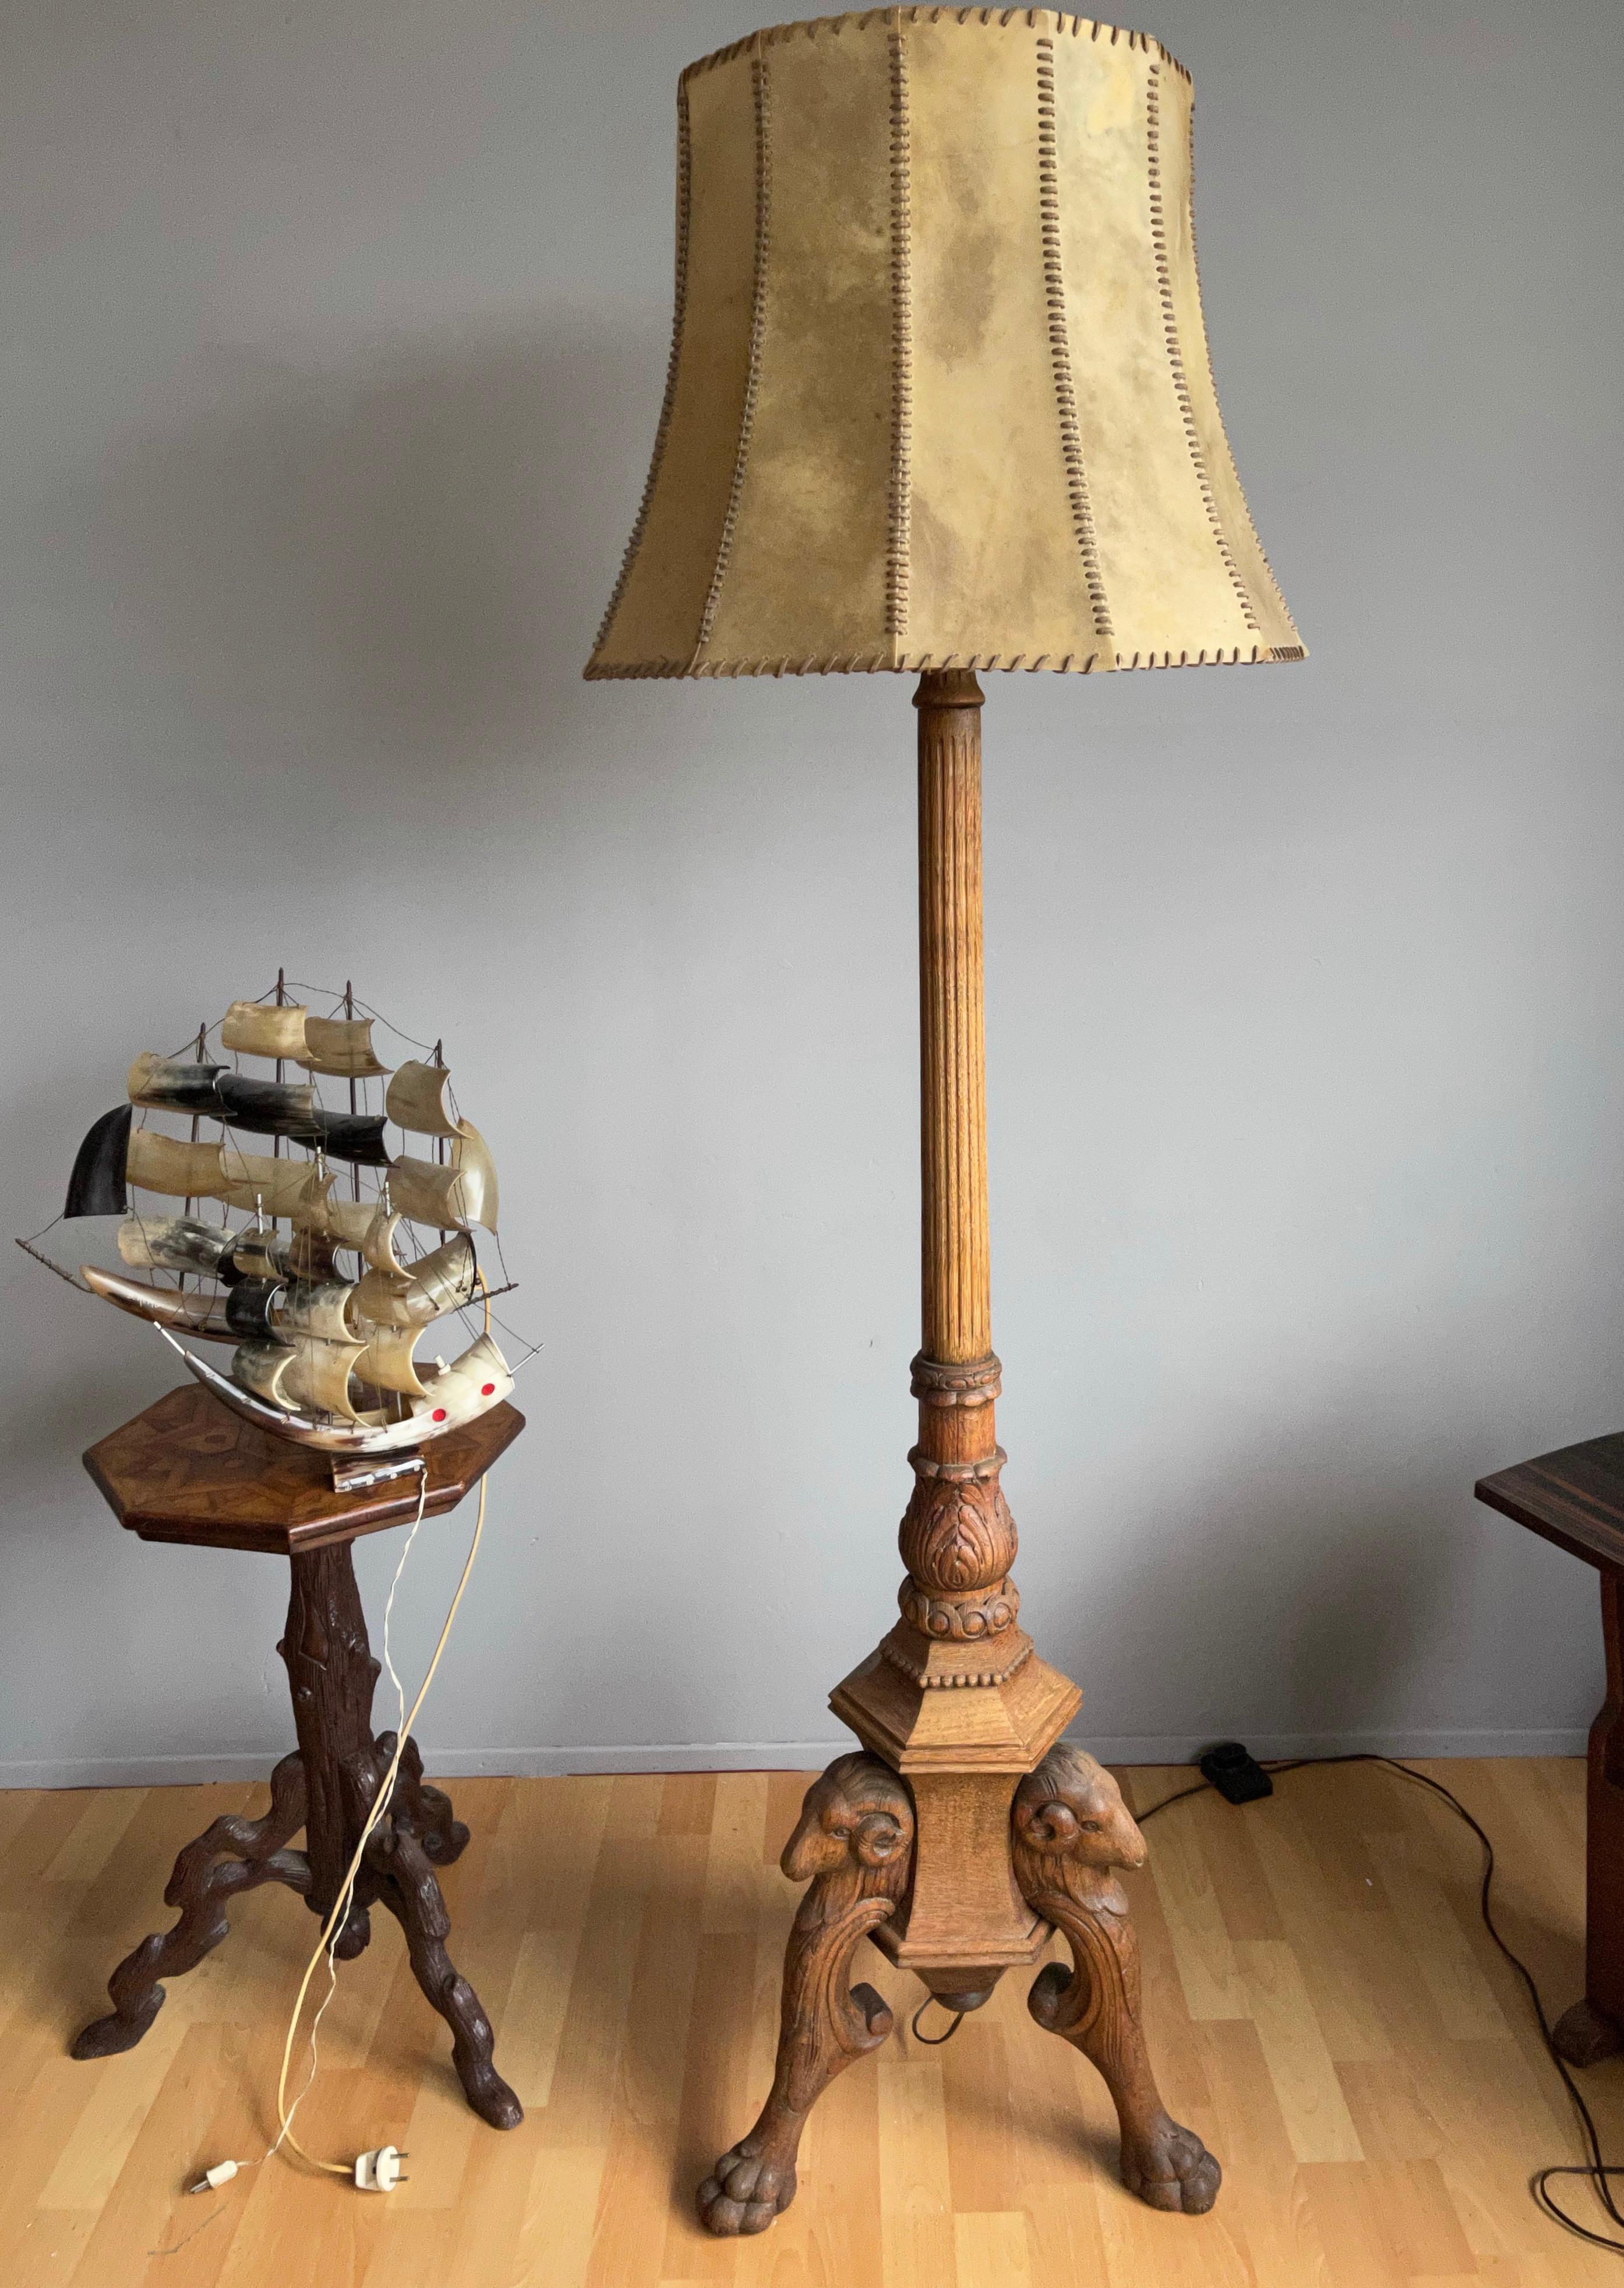 Unique and all handcrafted antique oak floor lamp with a hide and leather lace shade.

If you are looking for an incredibly well crafted, great looking, decorative and meaningful antique lamp for your home, library or office then this fine specimen